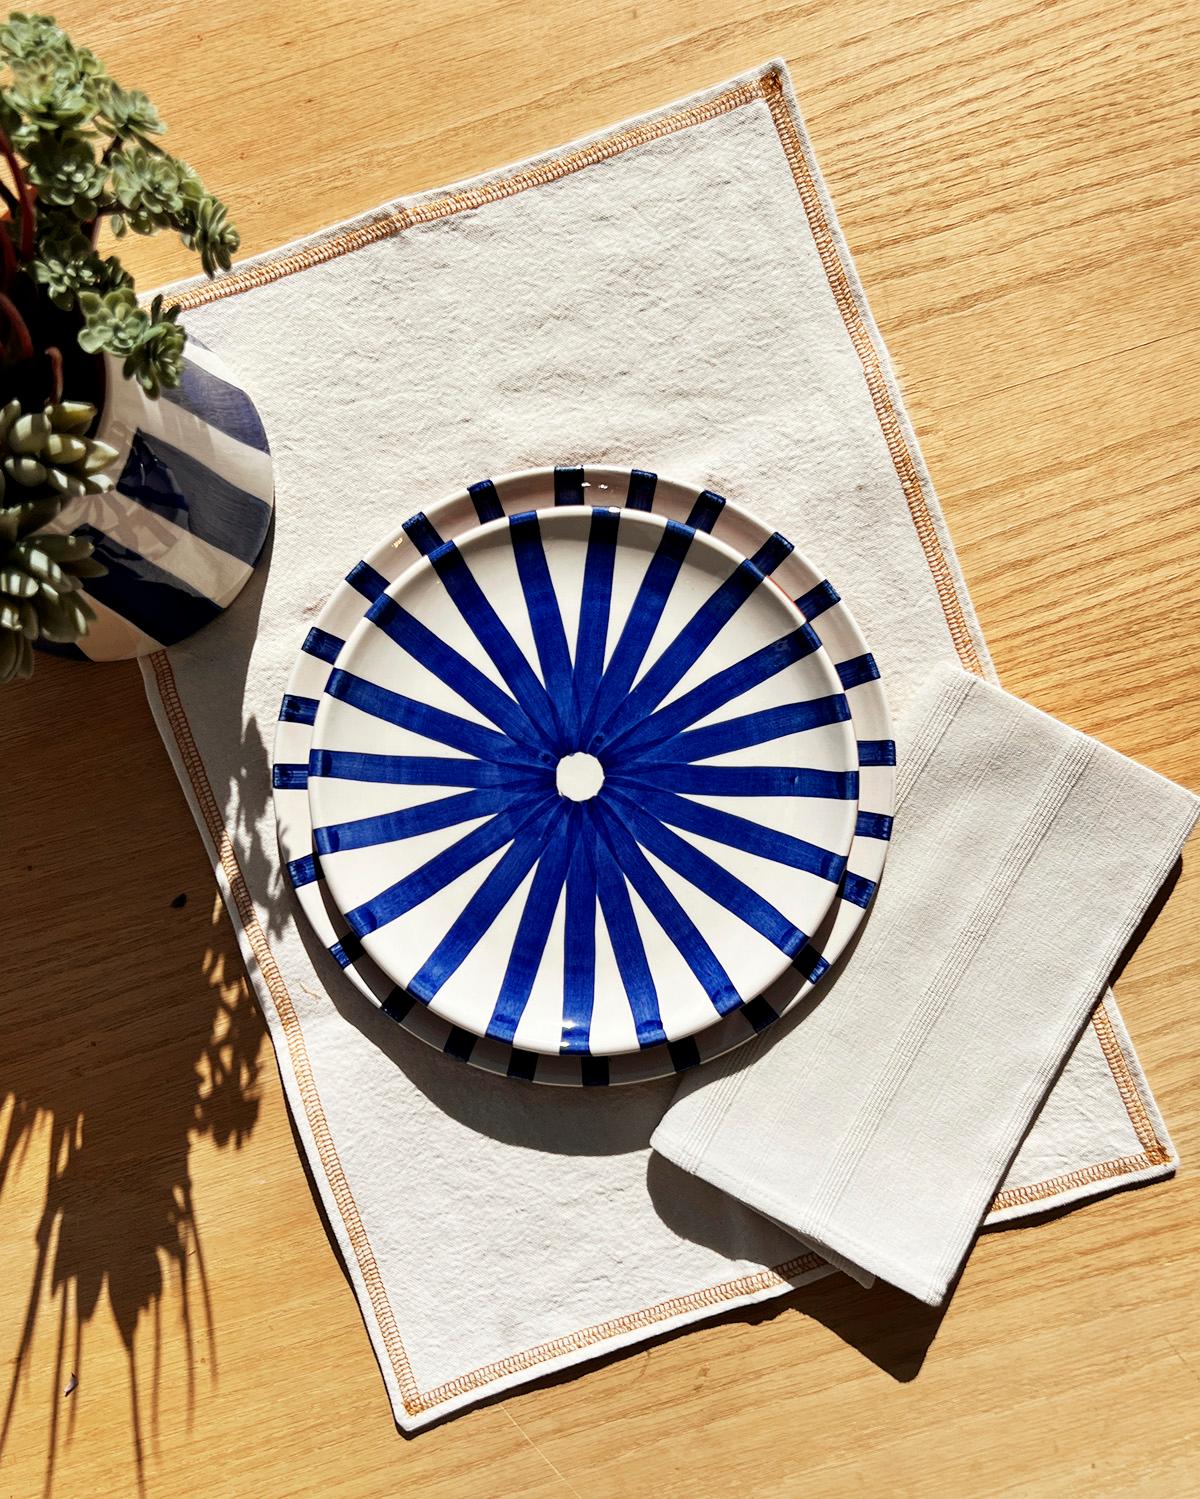 The perfect place setting for your dinnerware.
These White Chambray Cotton Placemats will add a minimalist yet chic touch to your dinner table. Made in Los Angeles, they feature subtle red stitching and are inspired by French style. Perfect for any